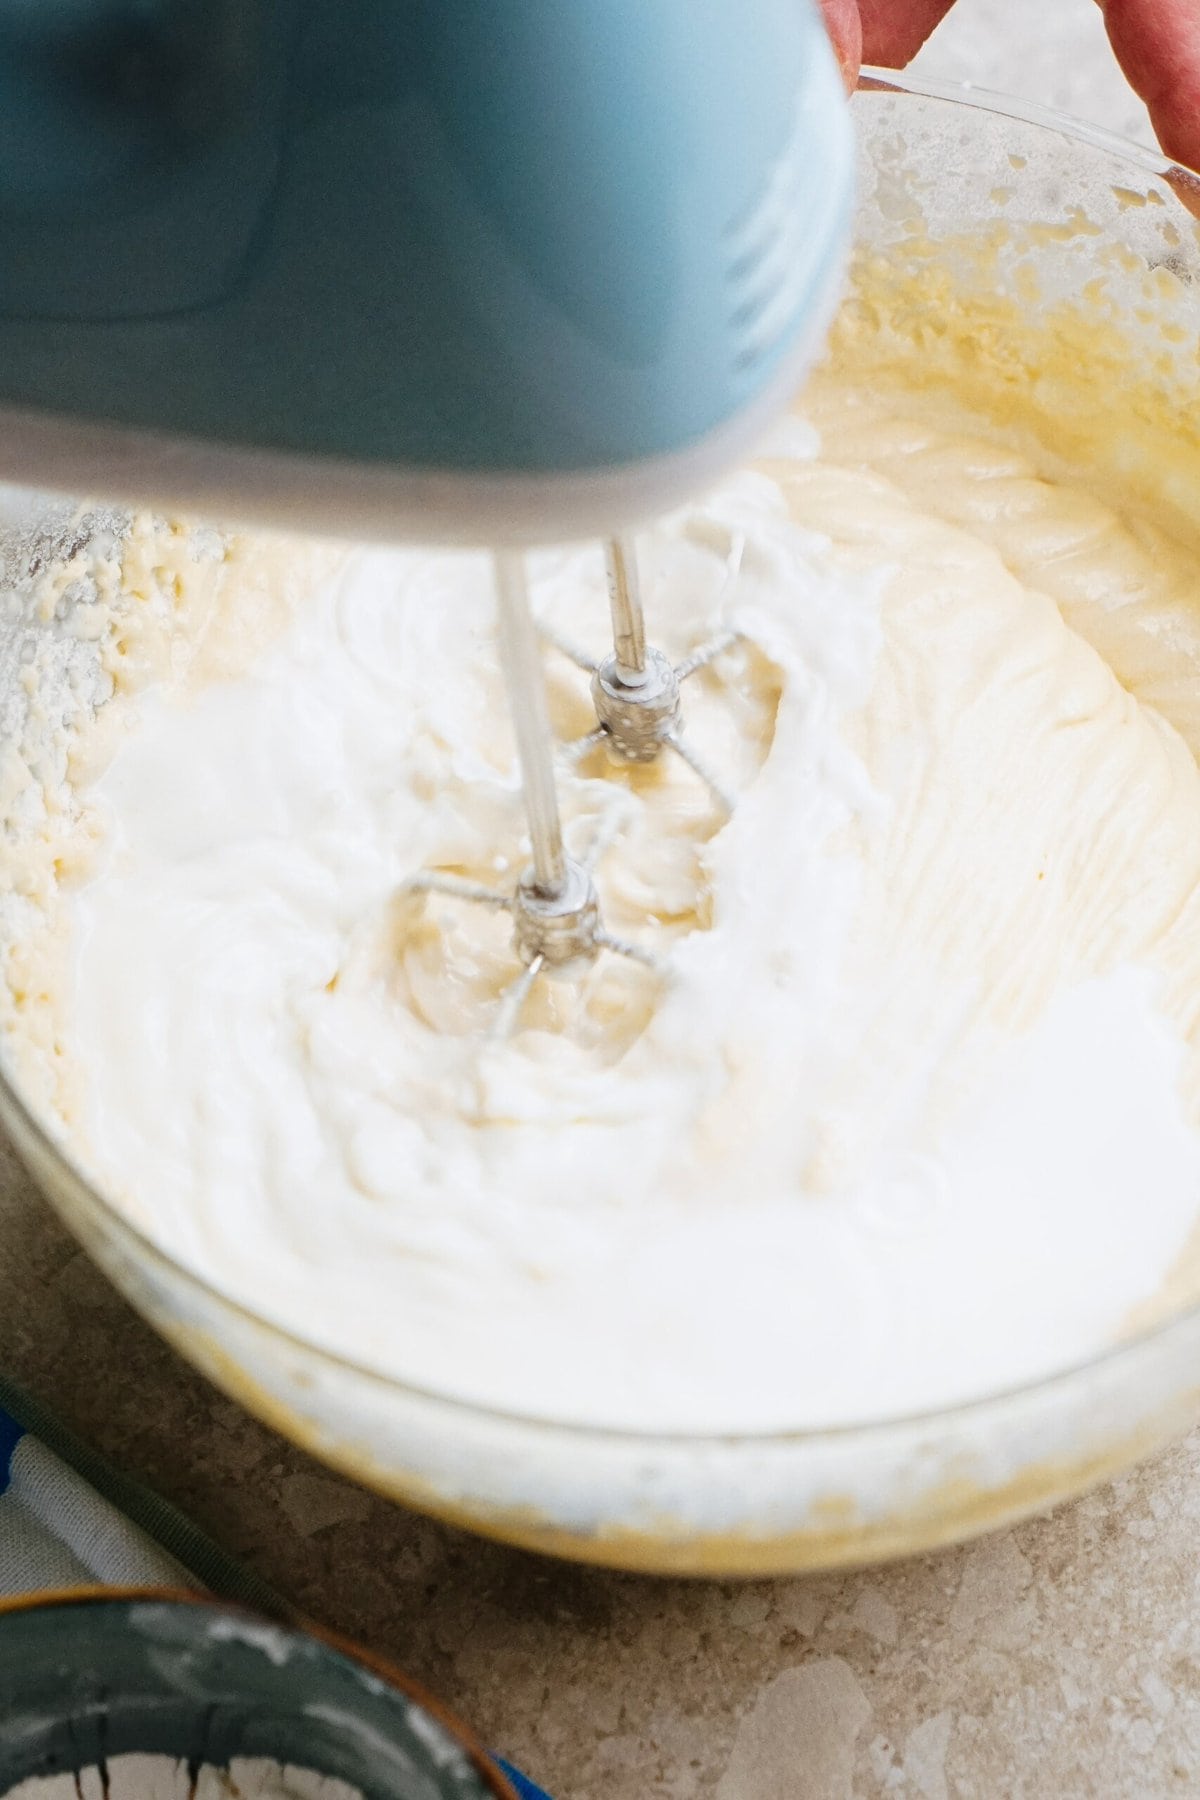 A blue hand mixer is being used to blend ingredients in a glass bowl filled with creamy batter.